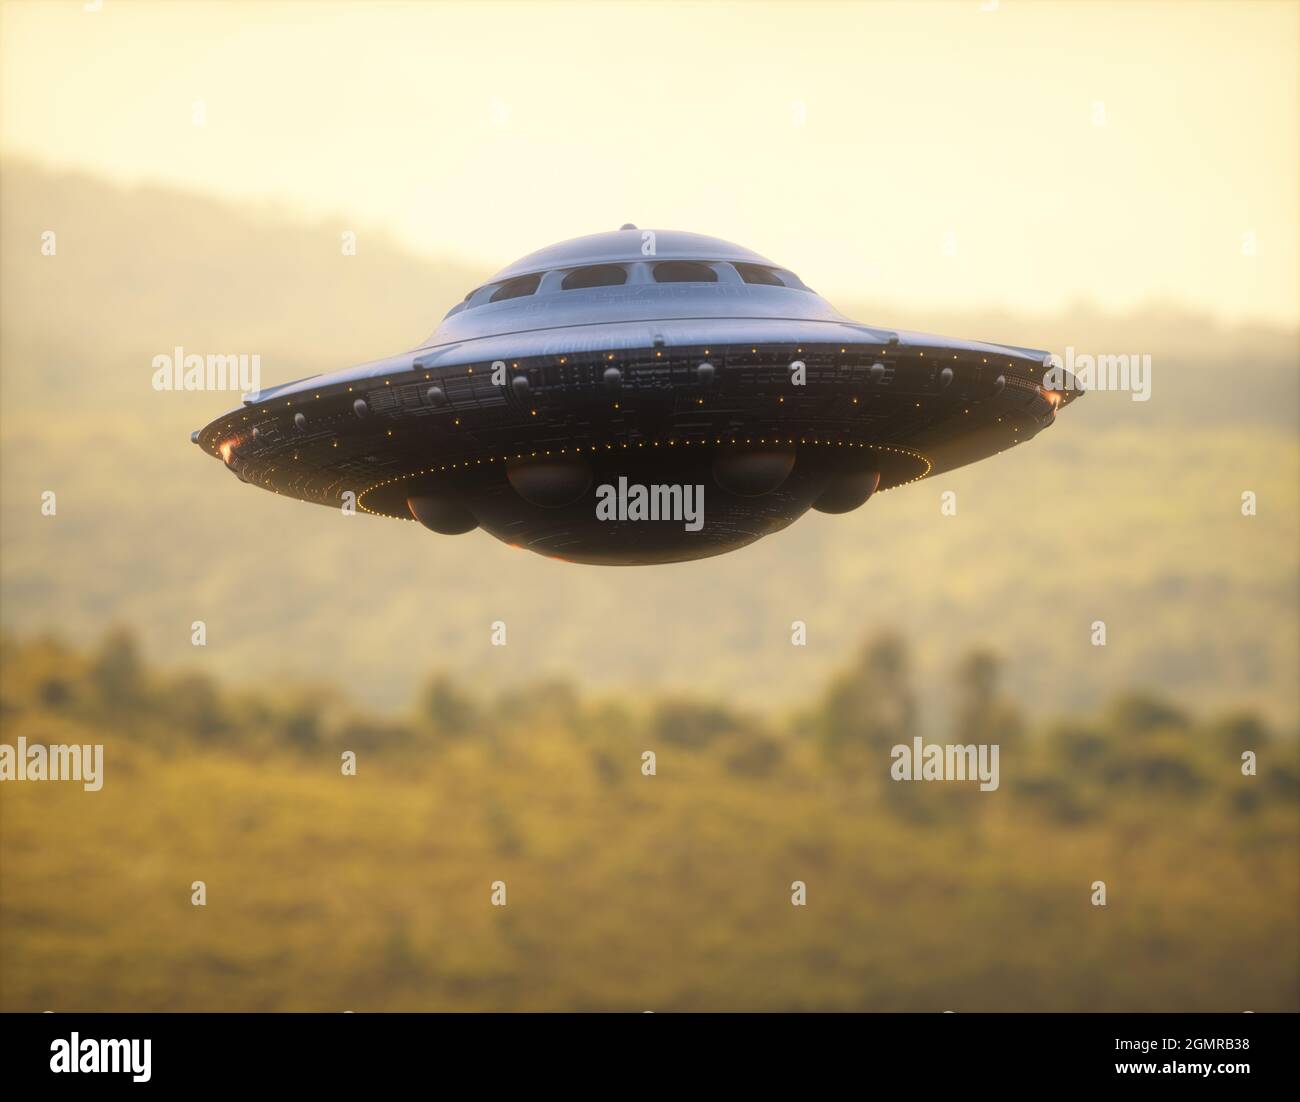 3D illustration of an UFO, unidentified flying object, gravitating over the forest and mountain ranges. Stock Photo